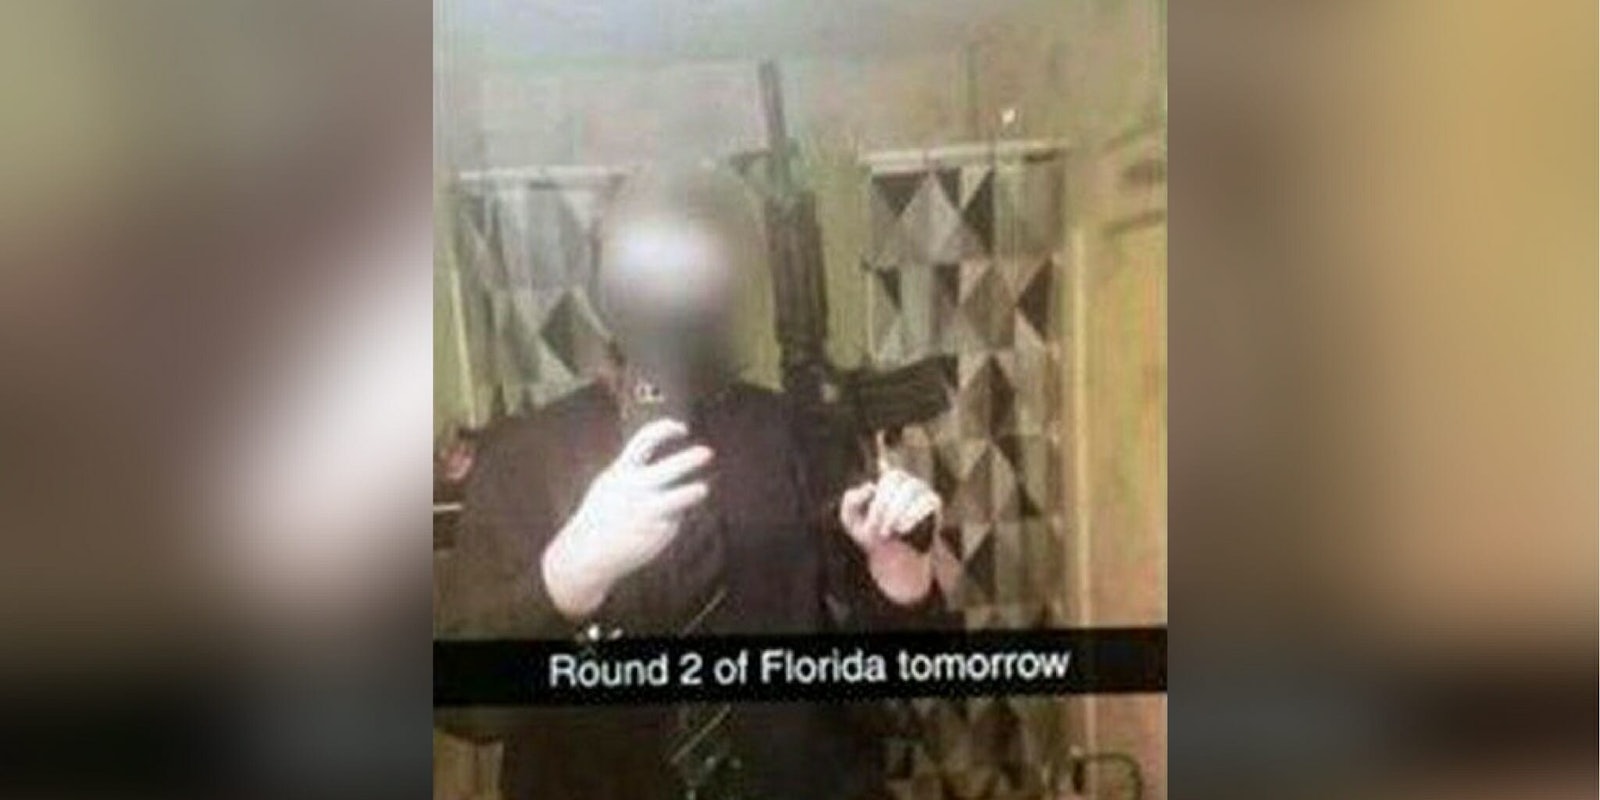 South Carolina student posts message with air soft rifle stating 'Florida Round 2' but said he's joking.